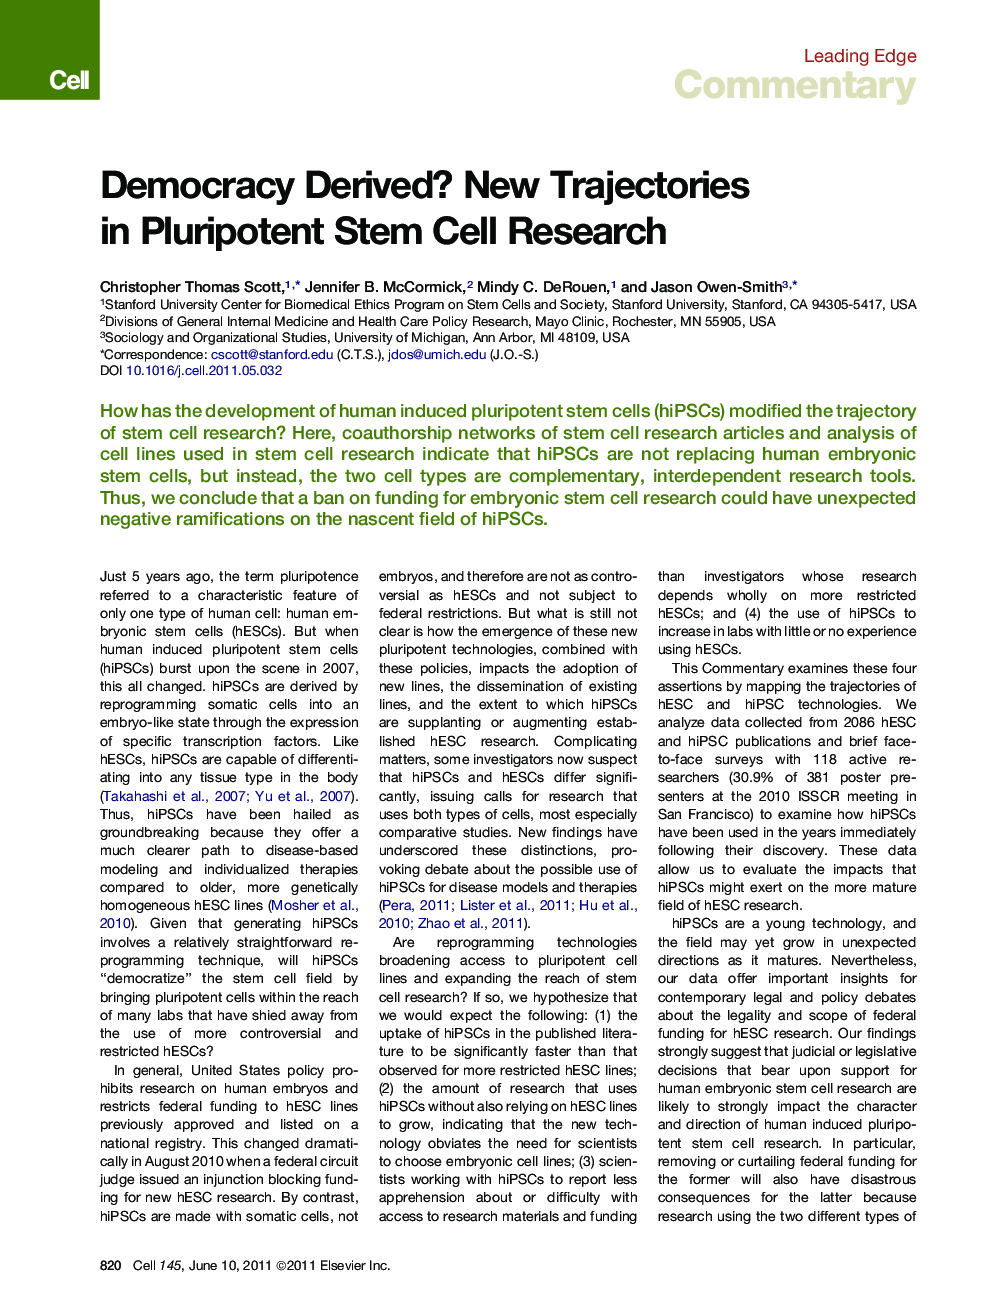 Democracy Derived? New Trajectories in Pluripotent Stem Cell Research